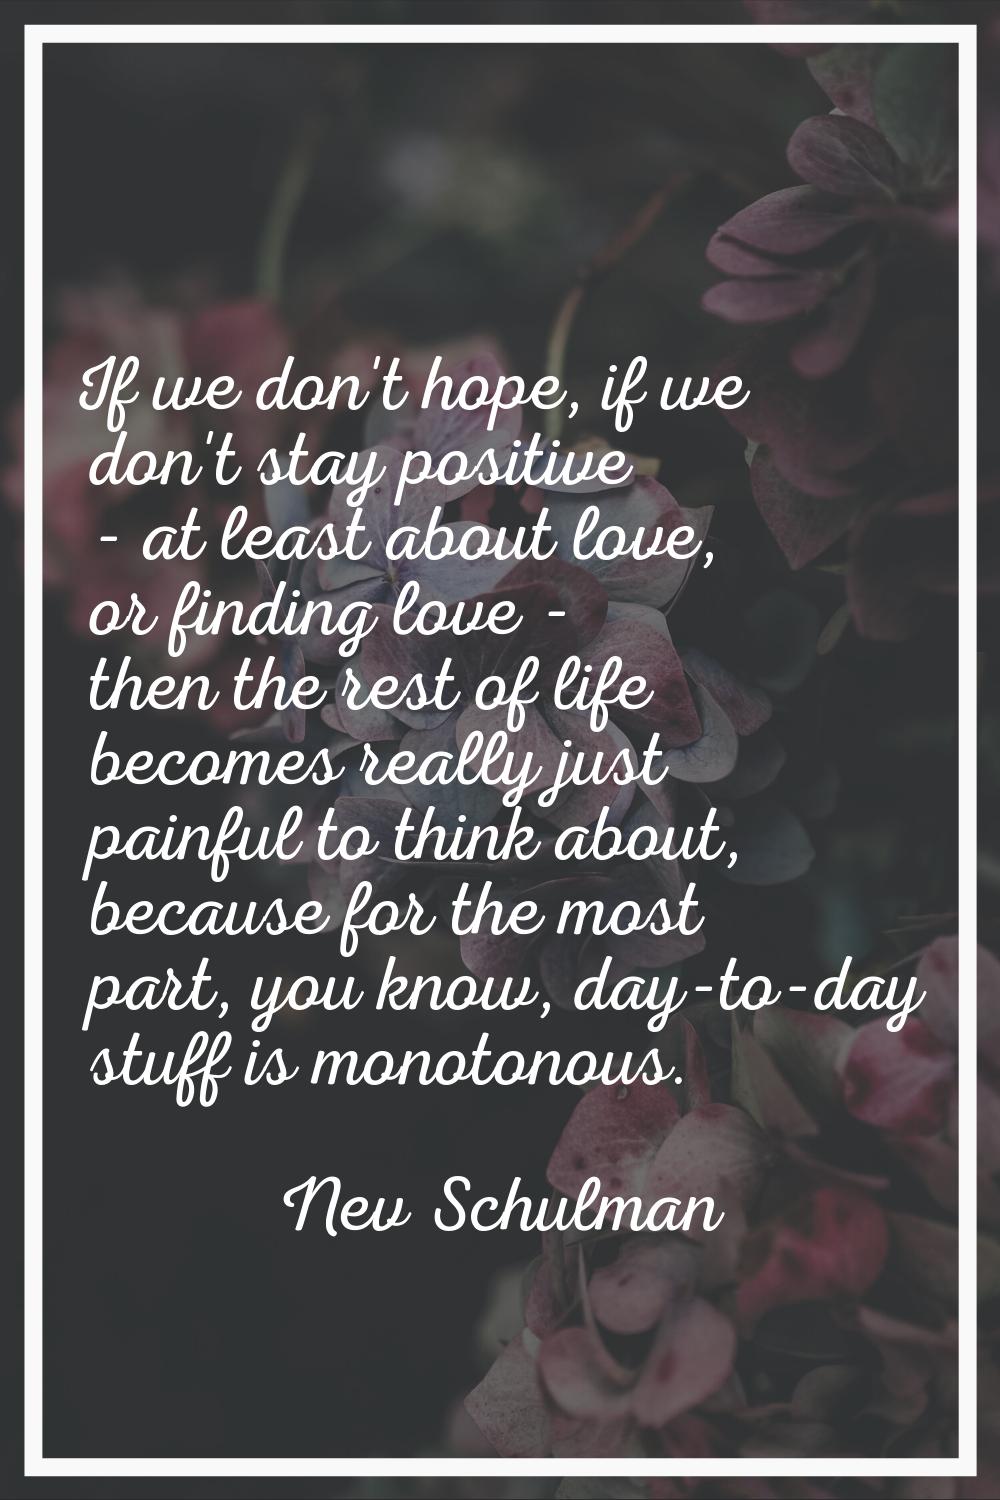 If we don't hope, if we don't stay positive - at least about love, or finding love - then the rest 